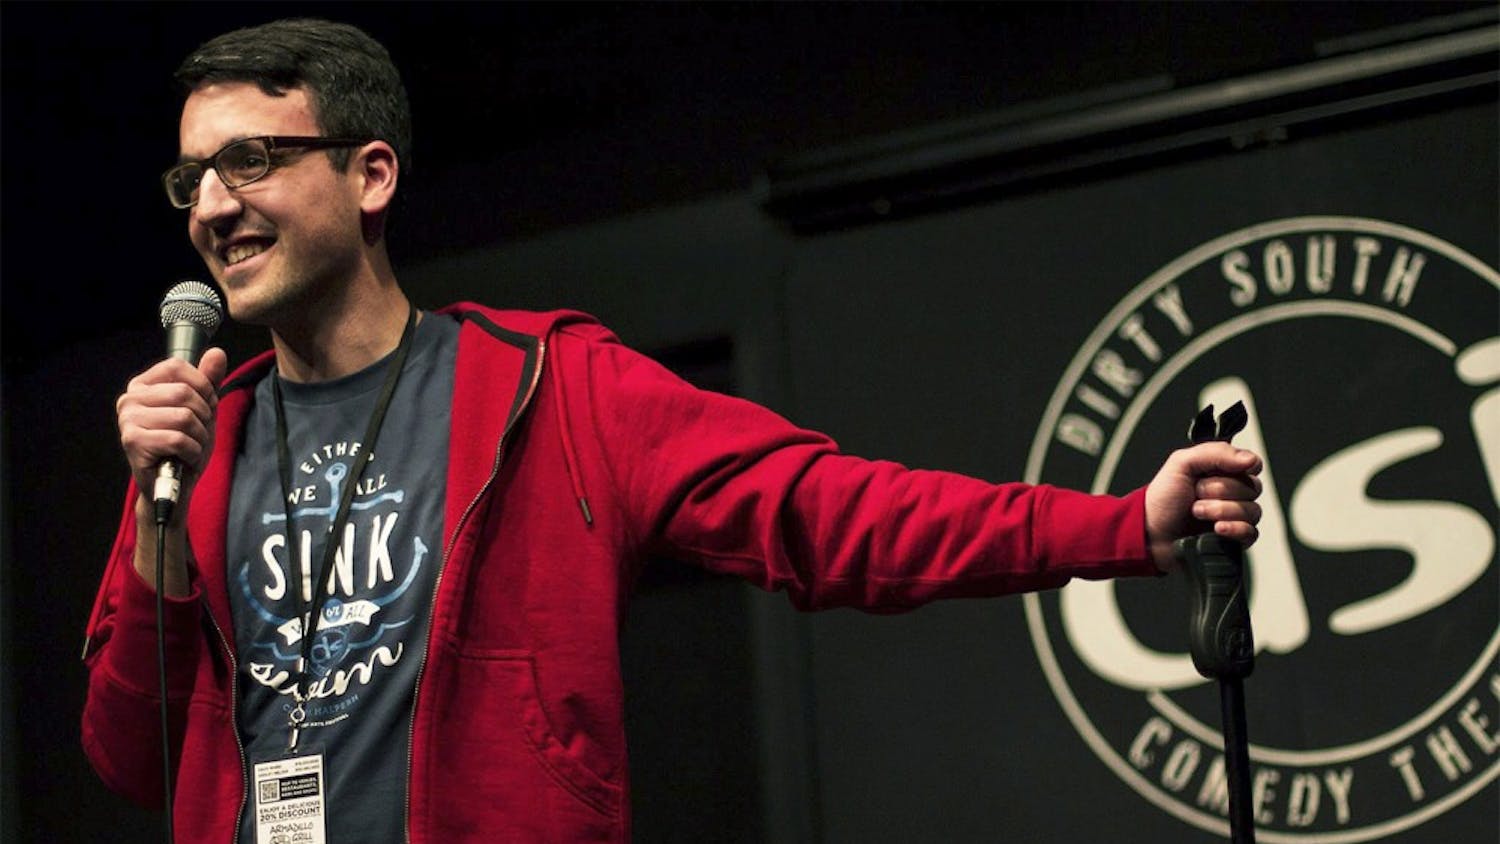 Andrew Aghapour, a Ph.D. student and stand-up writing workshop teacher, performs at N.C. Comedy Arts Festival on Feb. 5, 2015. Courtesy of Ryan Kelly Coil.